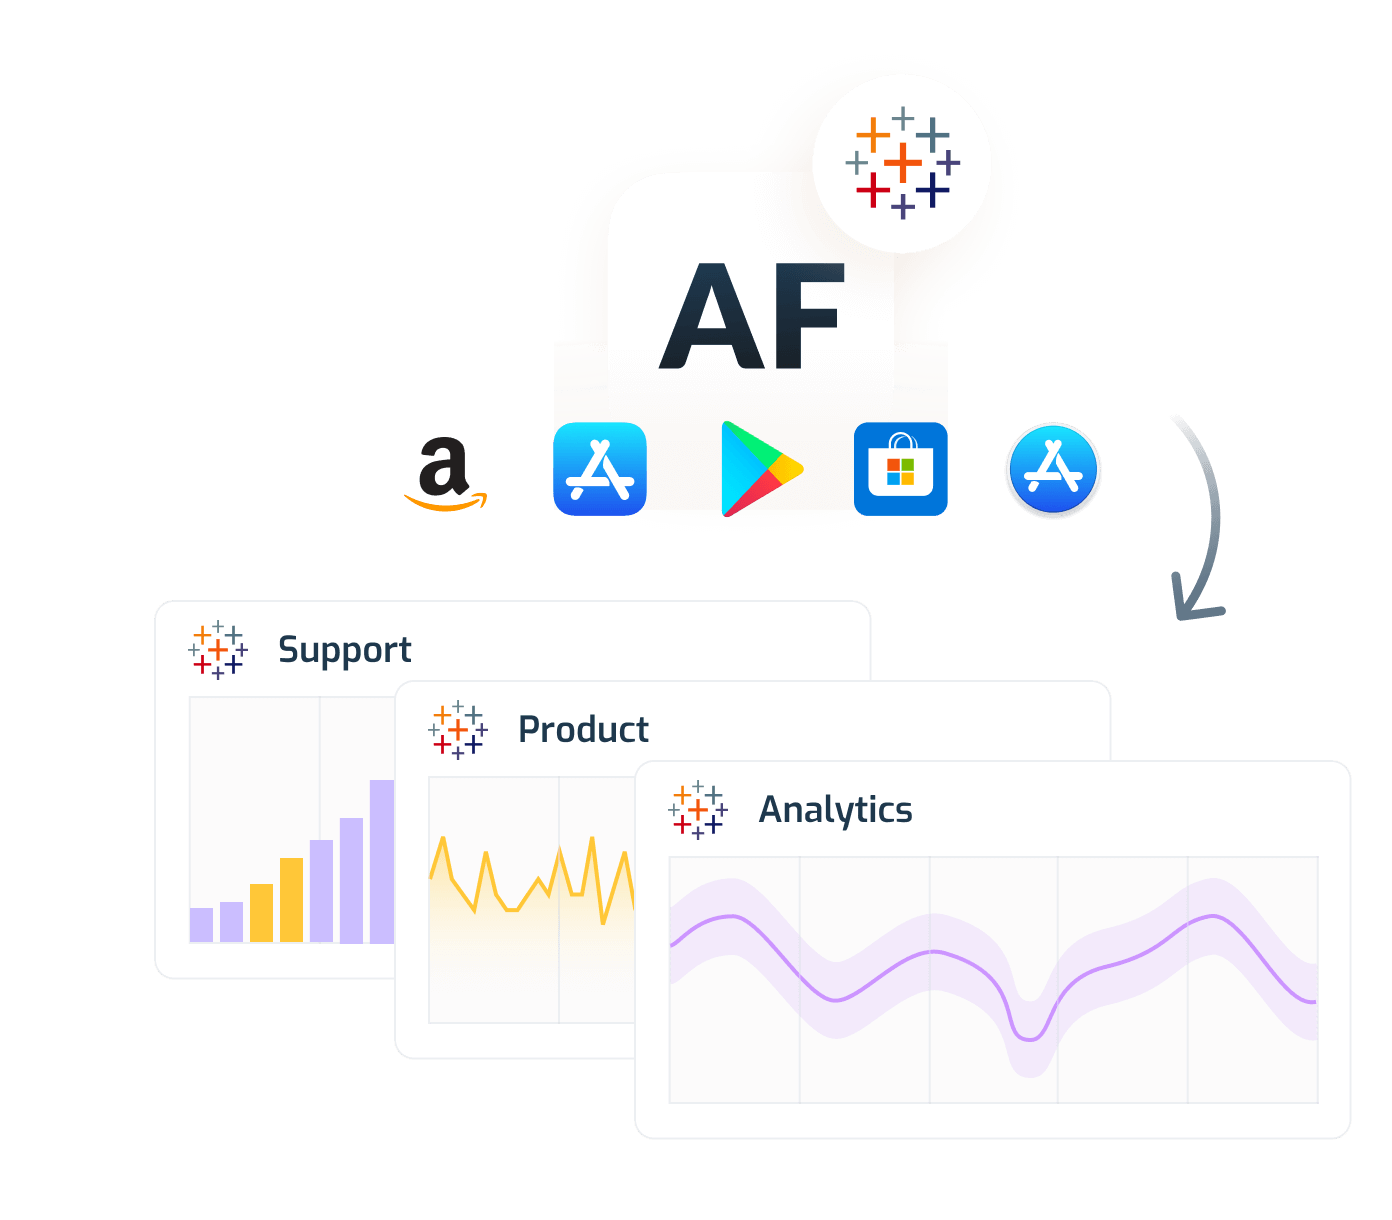 Get app reviews and usage data into Tableau with AppFollow